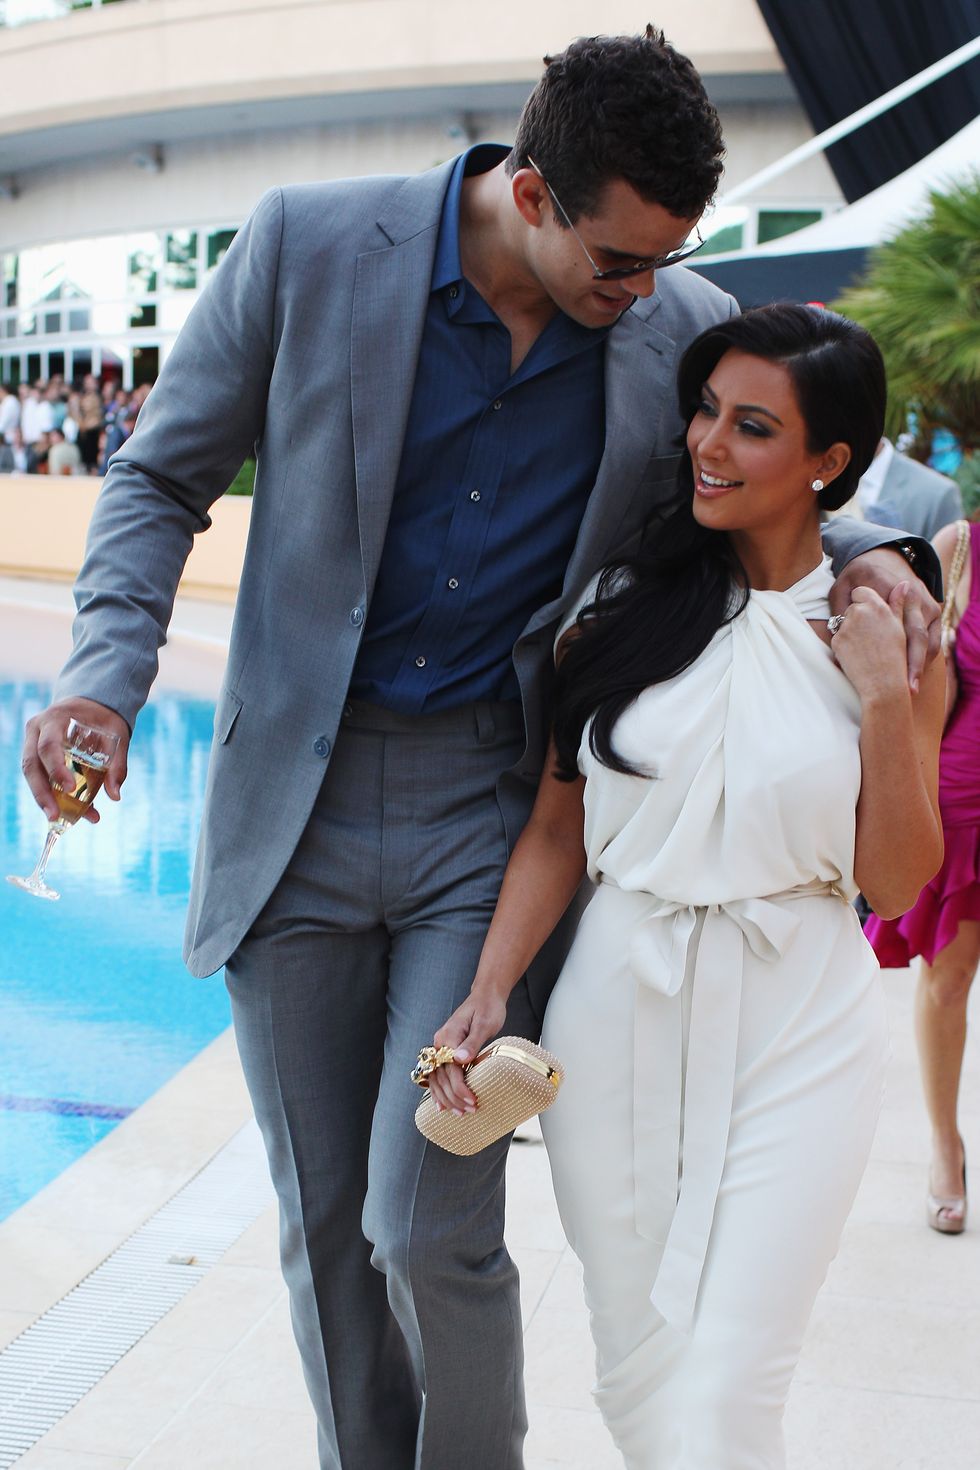 monte carlo, monaco   may 27  kim kardashian and kris humphries attend the amber fashion show held at the meridien beach plaza on may 27, 2011 in monte carlo, monaco  photo by mark thompsongetty images